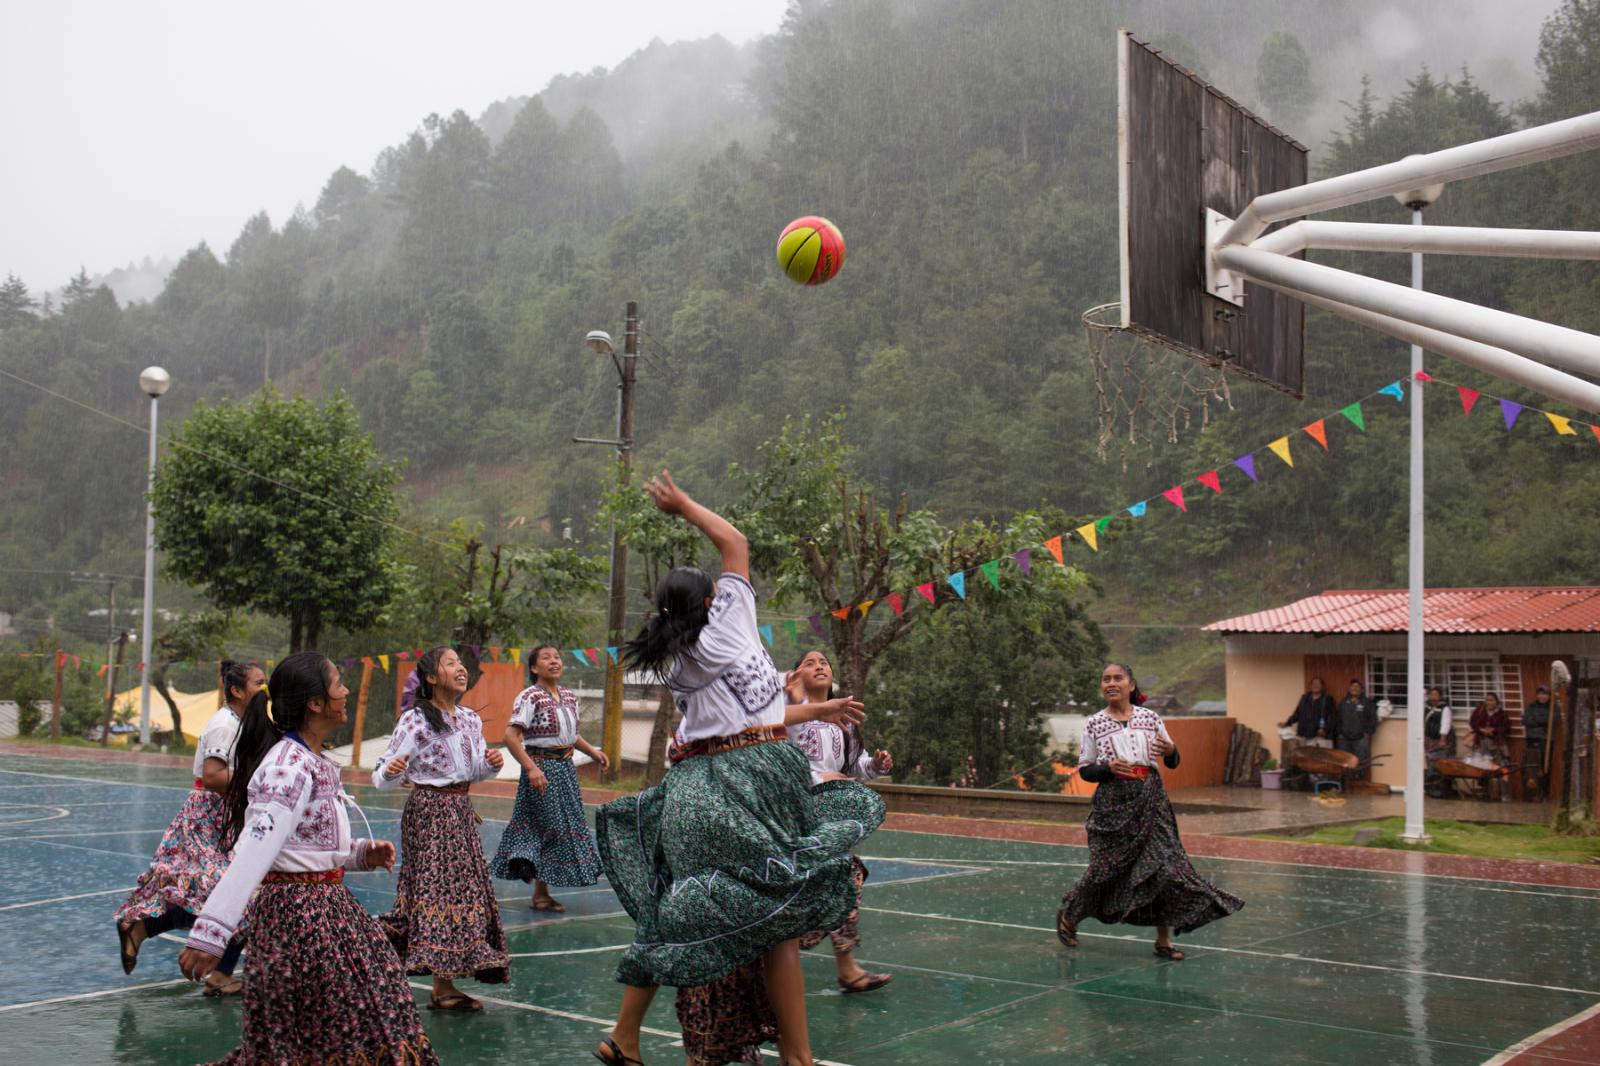 Image from Basketball in the Sierra Norte of Oaxaca - Team Gubby plays against Las Combinadas de Tlahui during...